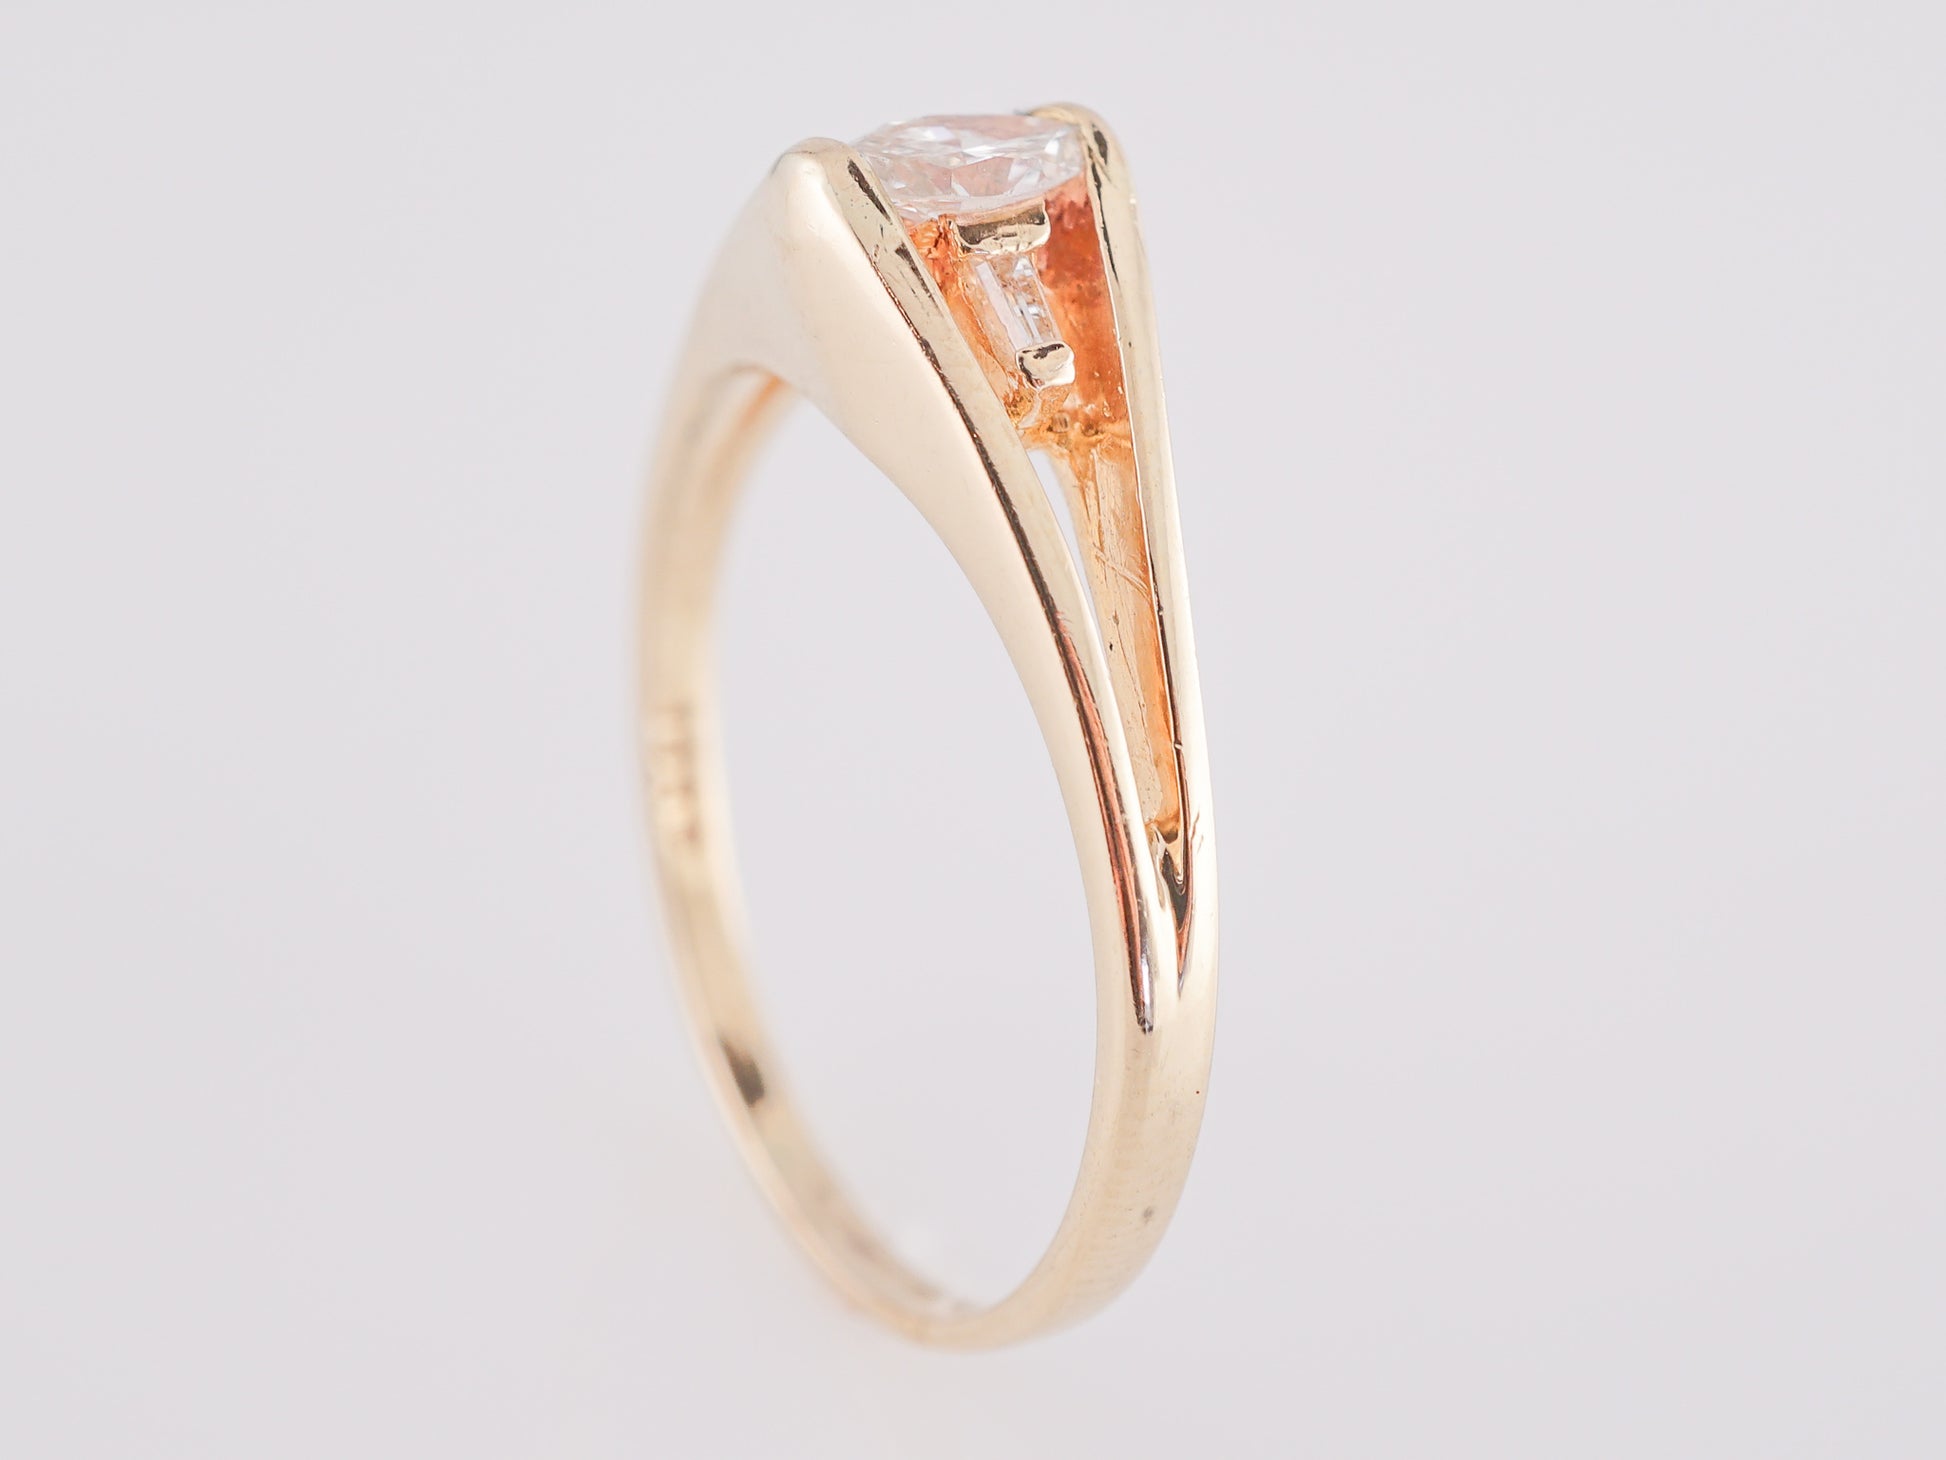 .18 Marquise Diamond Engagement Ring in 14K Yellow Gold